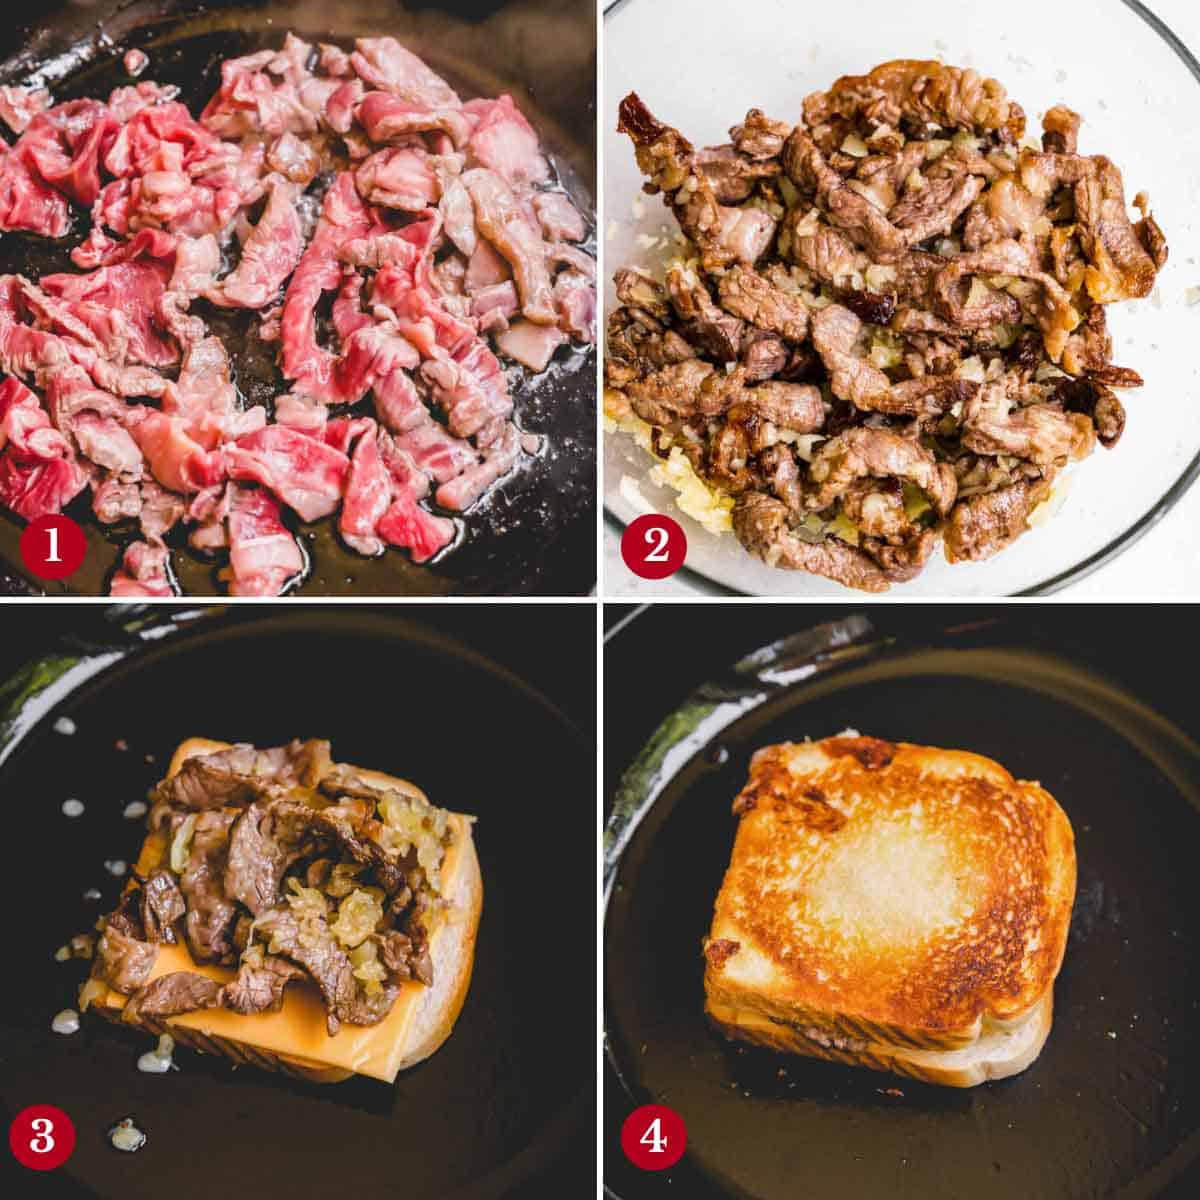 Step by step photos of making steak grilled cheese.